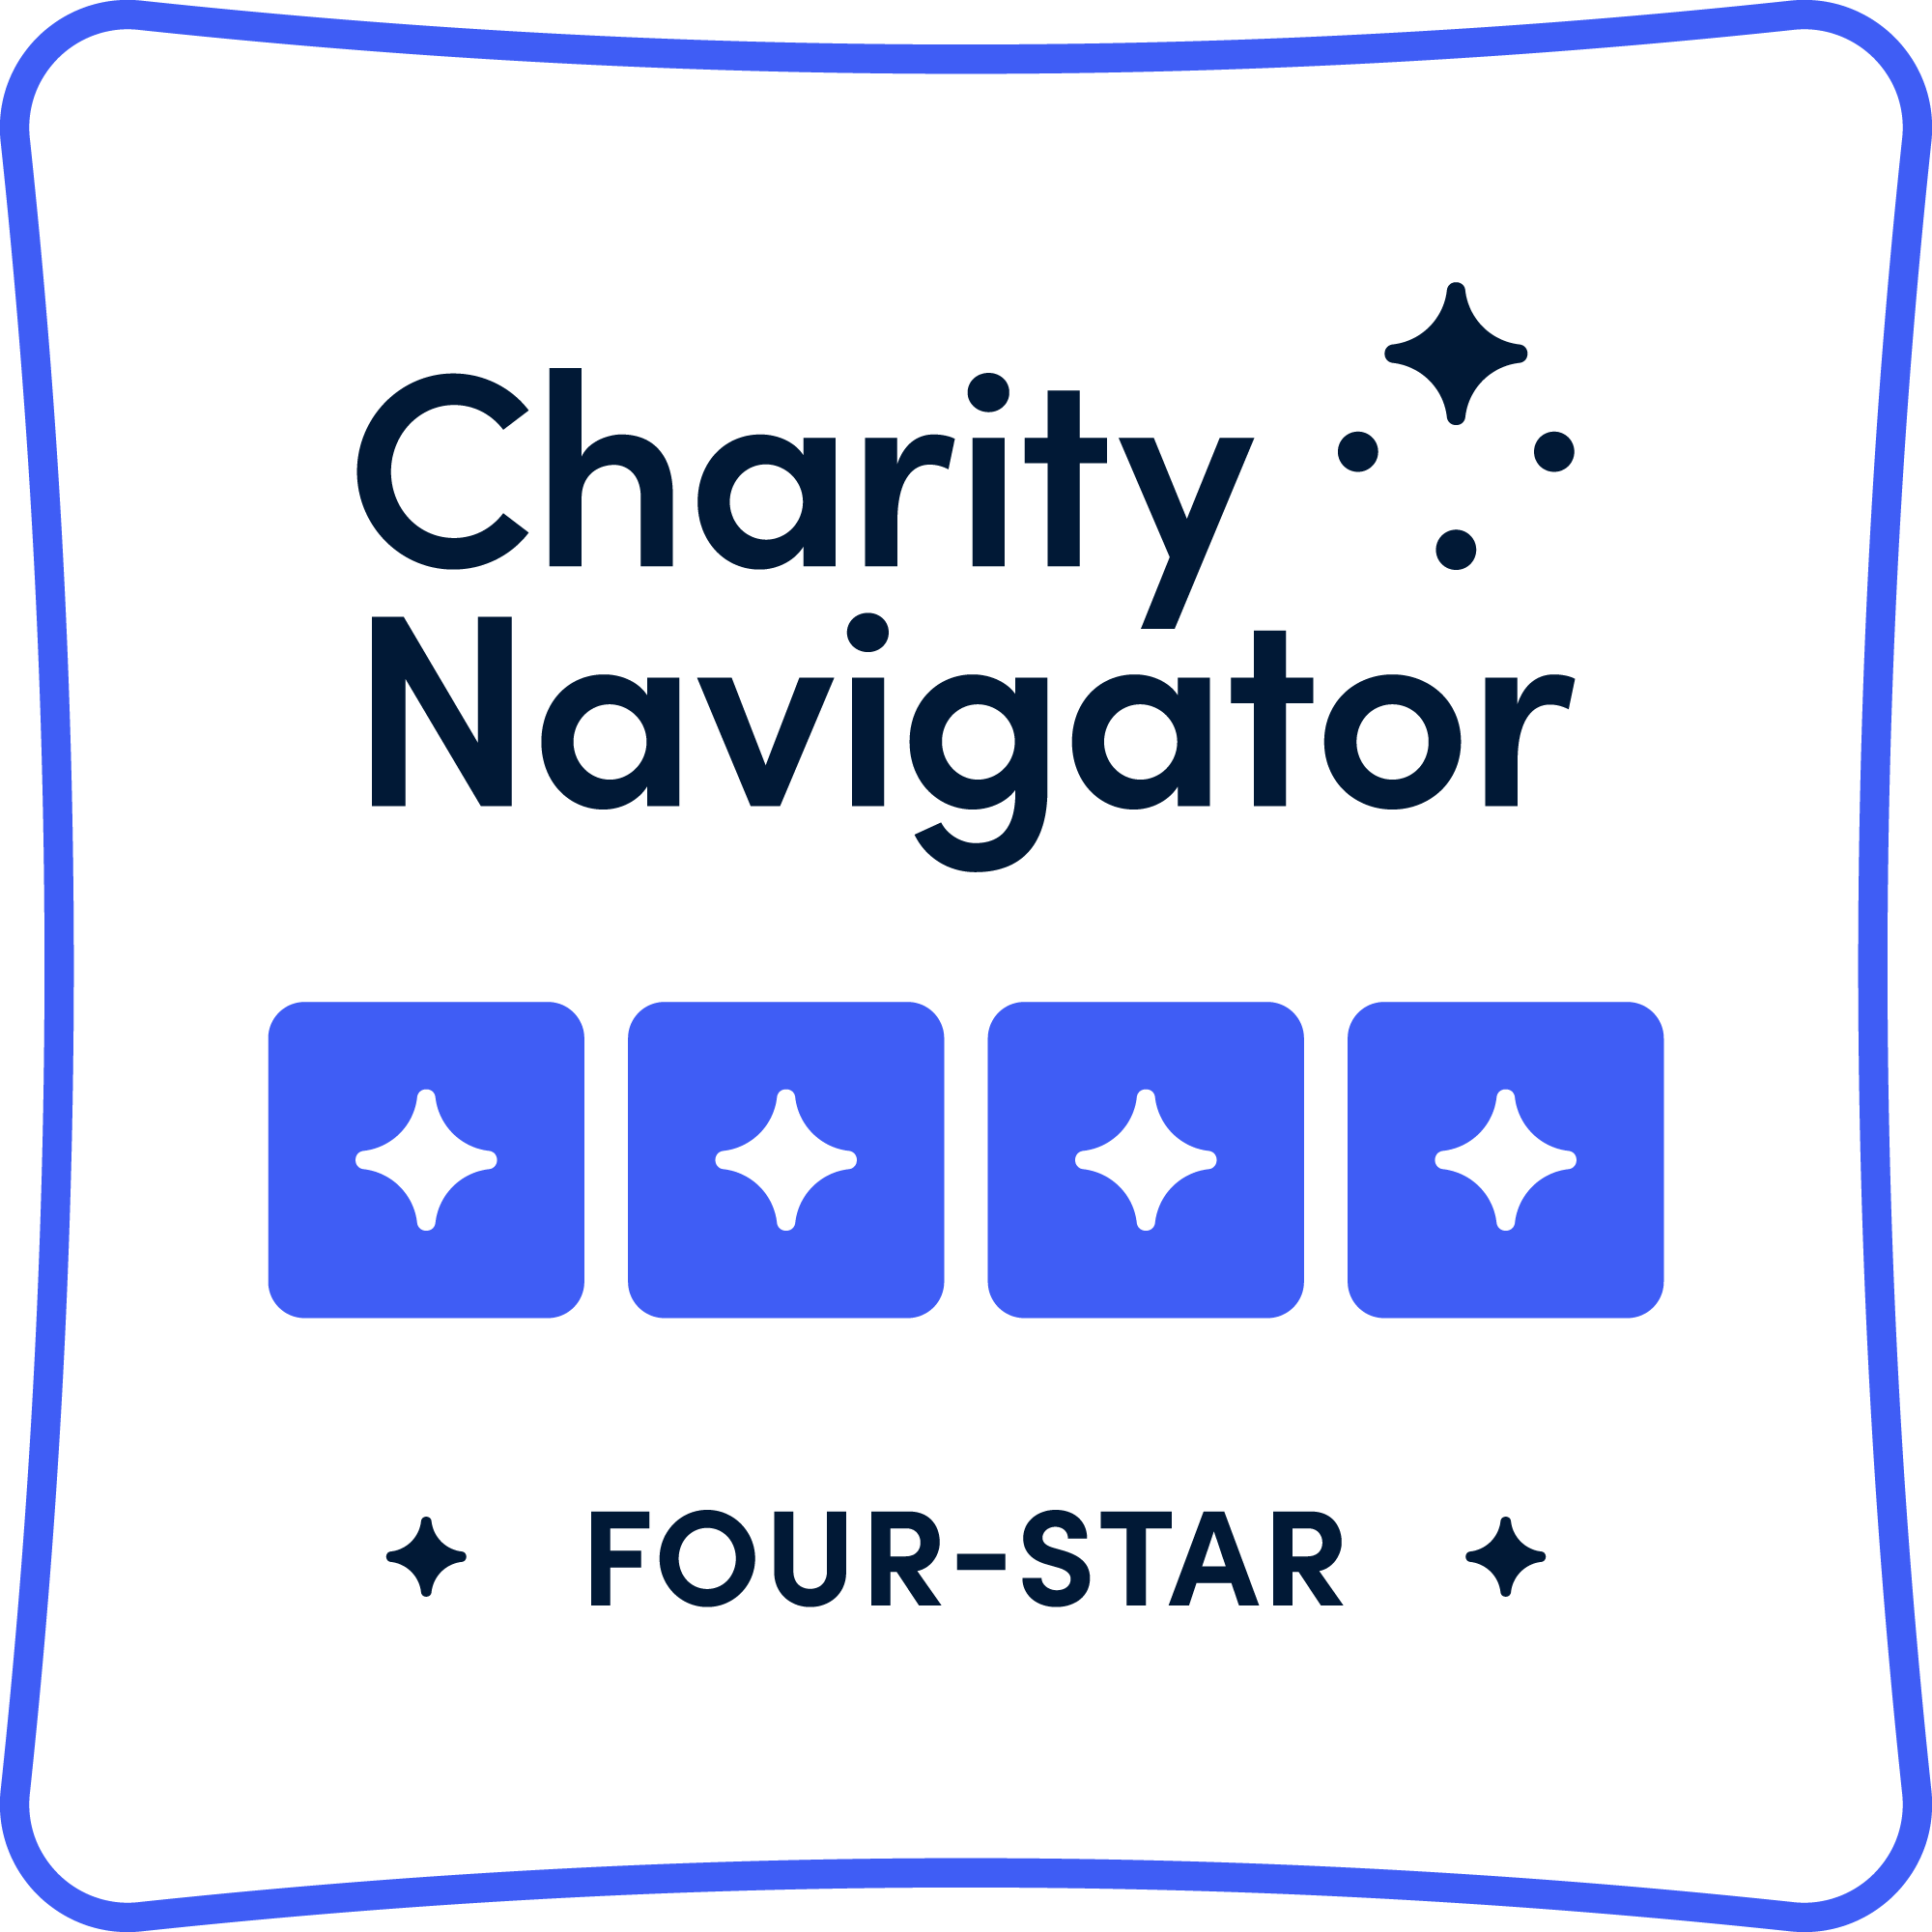 Charity Navigator - Four Star Charity Rating